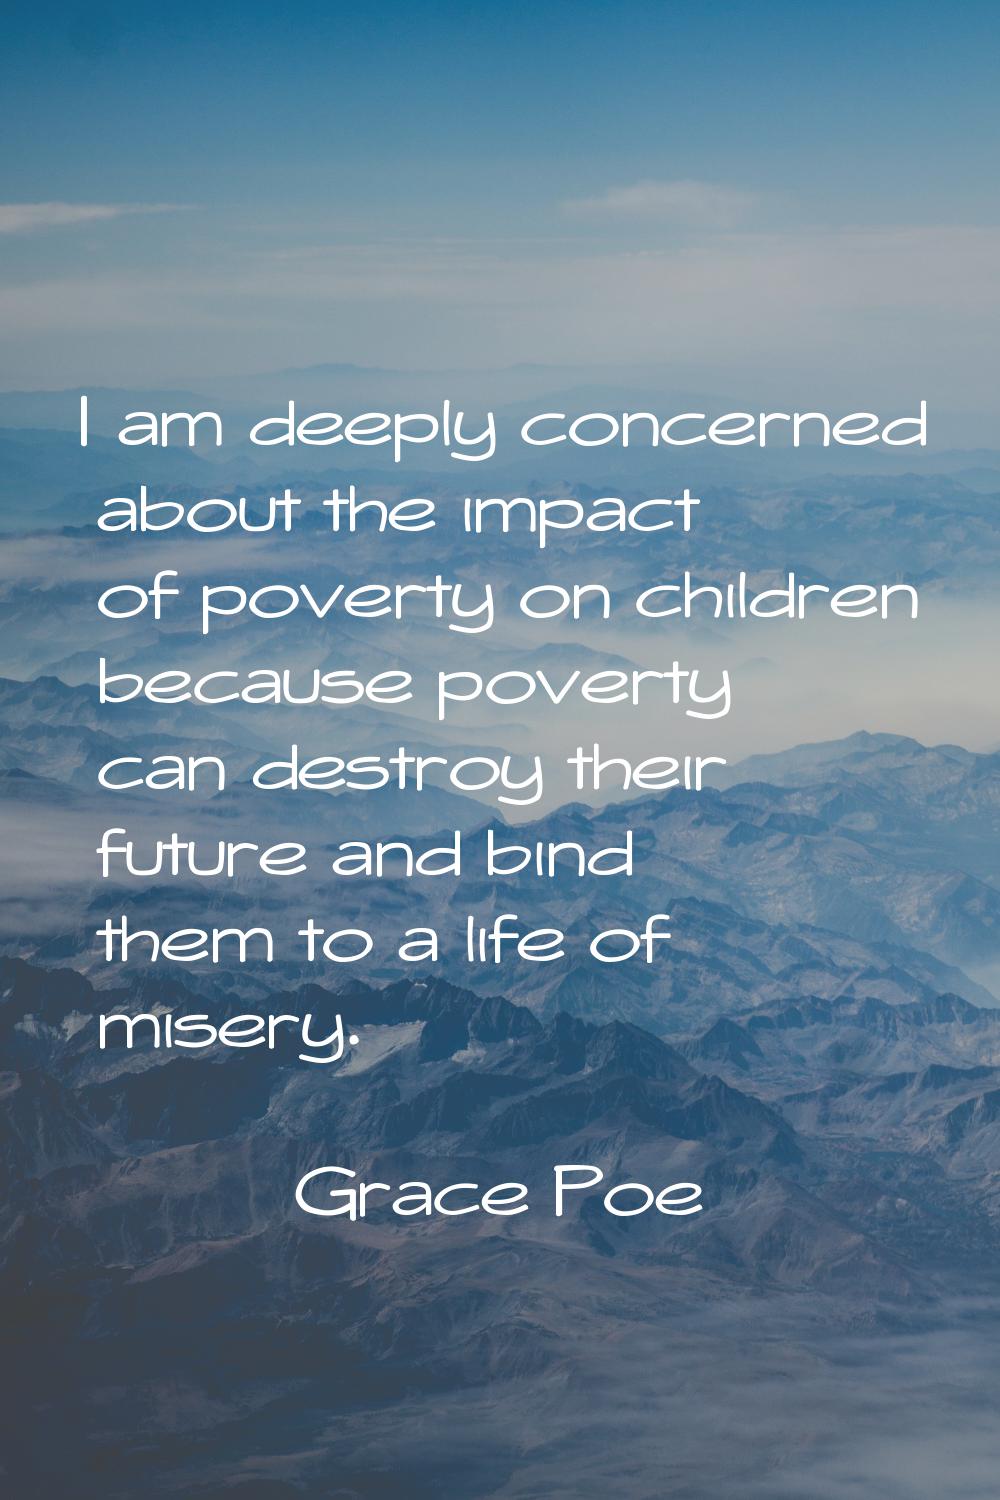 I am deeply concerned about the impact of poverty on children because poverty can destroy their fut